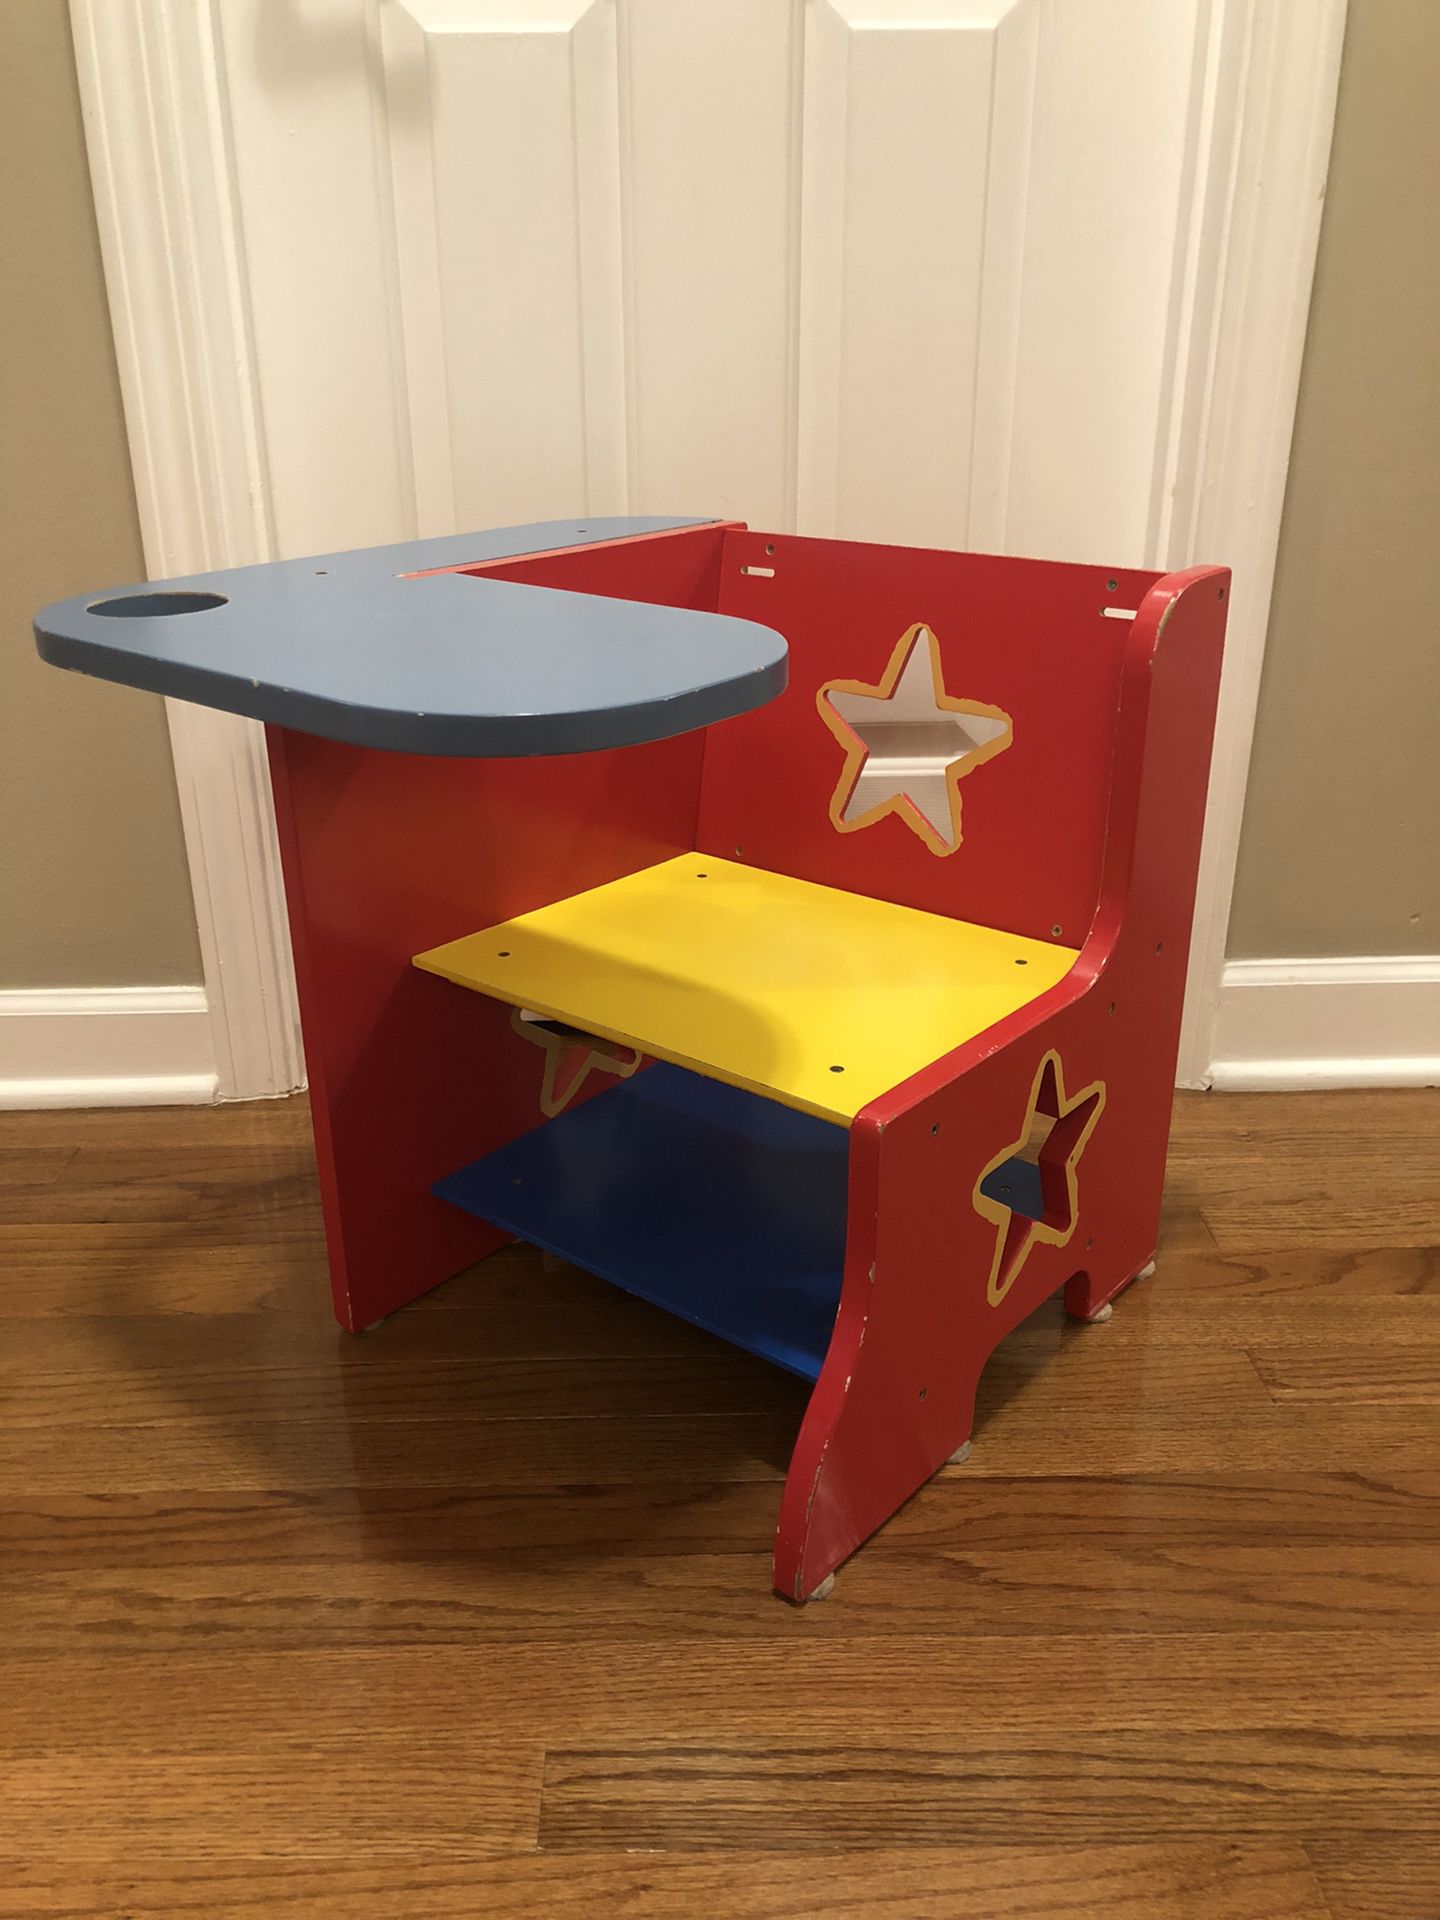 Kids table Desk With Storage And Cup holder. Well Loved But Still Functuonal. $20 Cash At Pickup In Apex